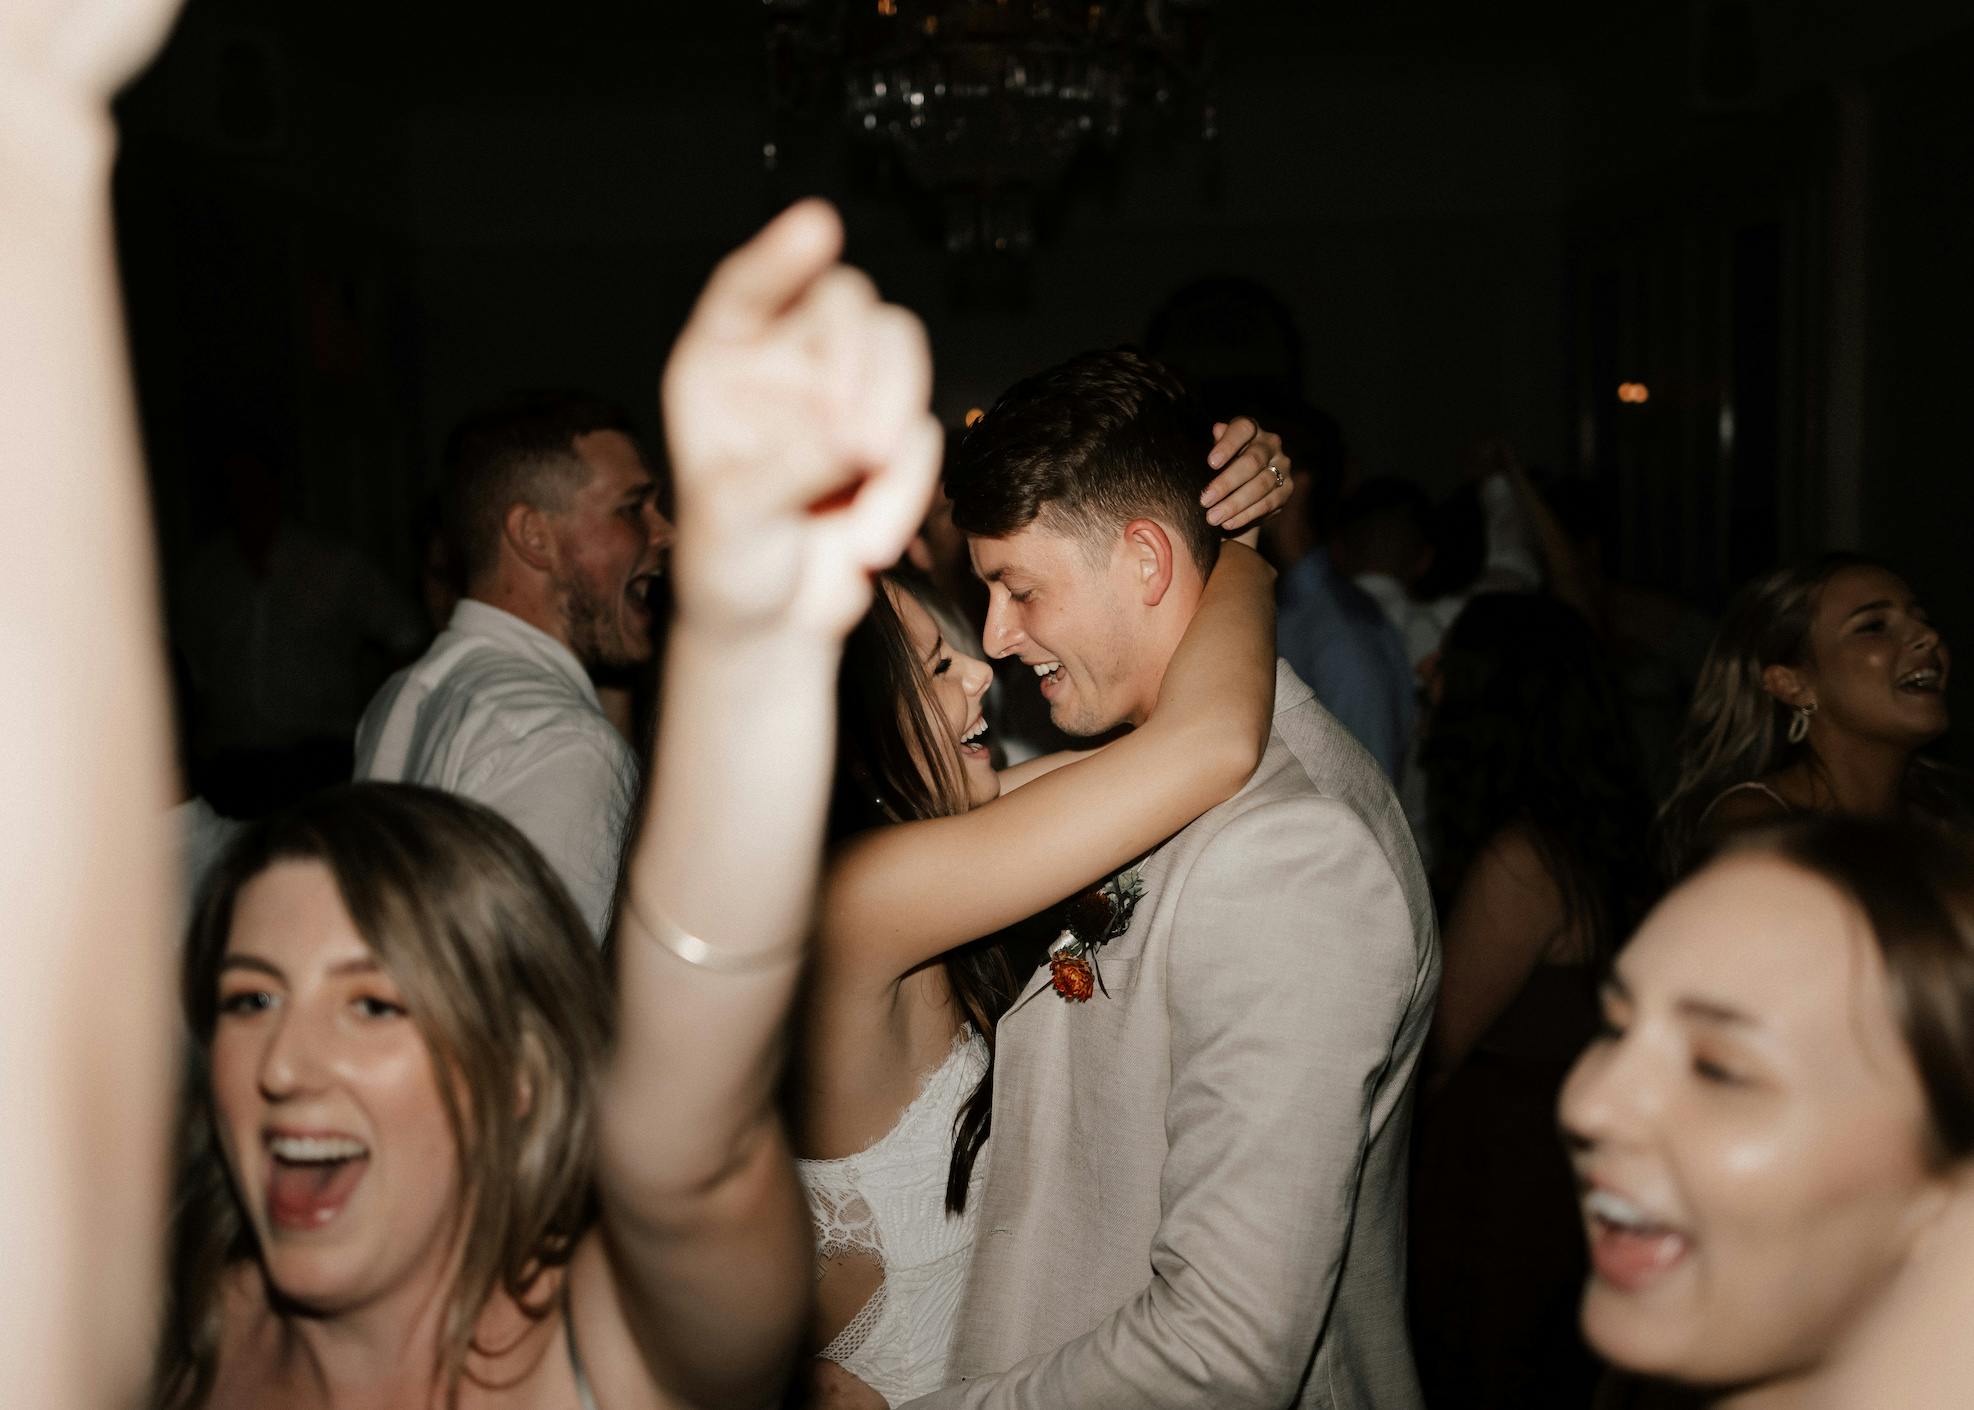 A couple is joyfully dancing and embracing on a crowded dance floor. People around them are cheering and dancing, visibly enjoying the moment. The atmosphere is lively and celebratory. The background is dimly lit, with a chandelier visible above.